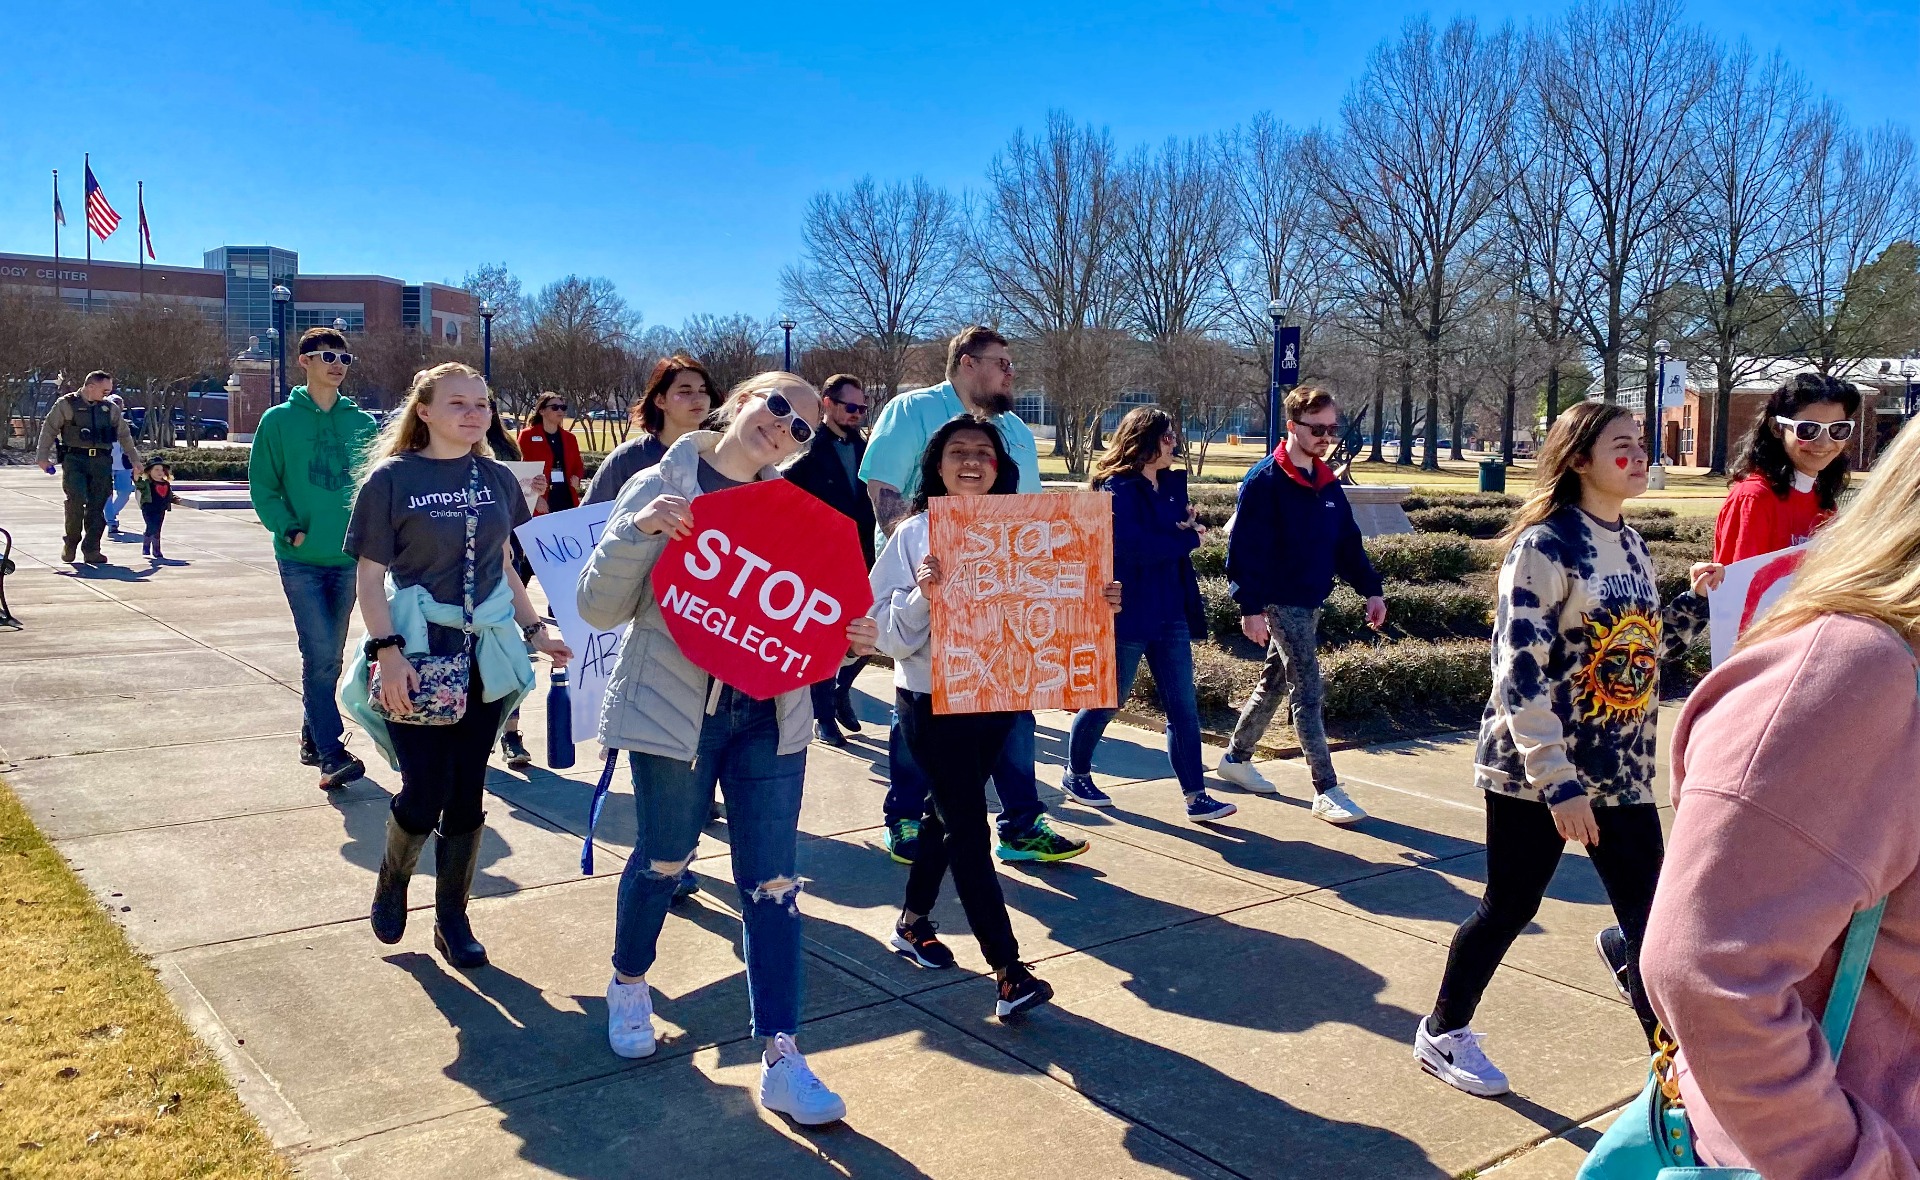 students marching holding signs that state "stop neglect" and "stop abuse, no excuse."